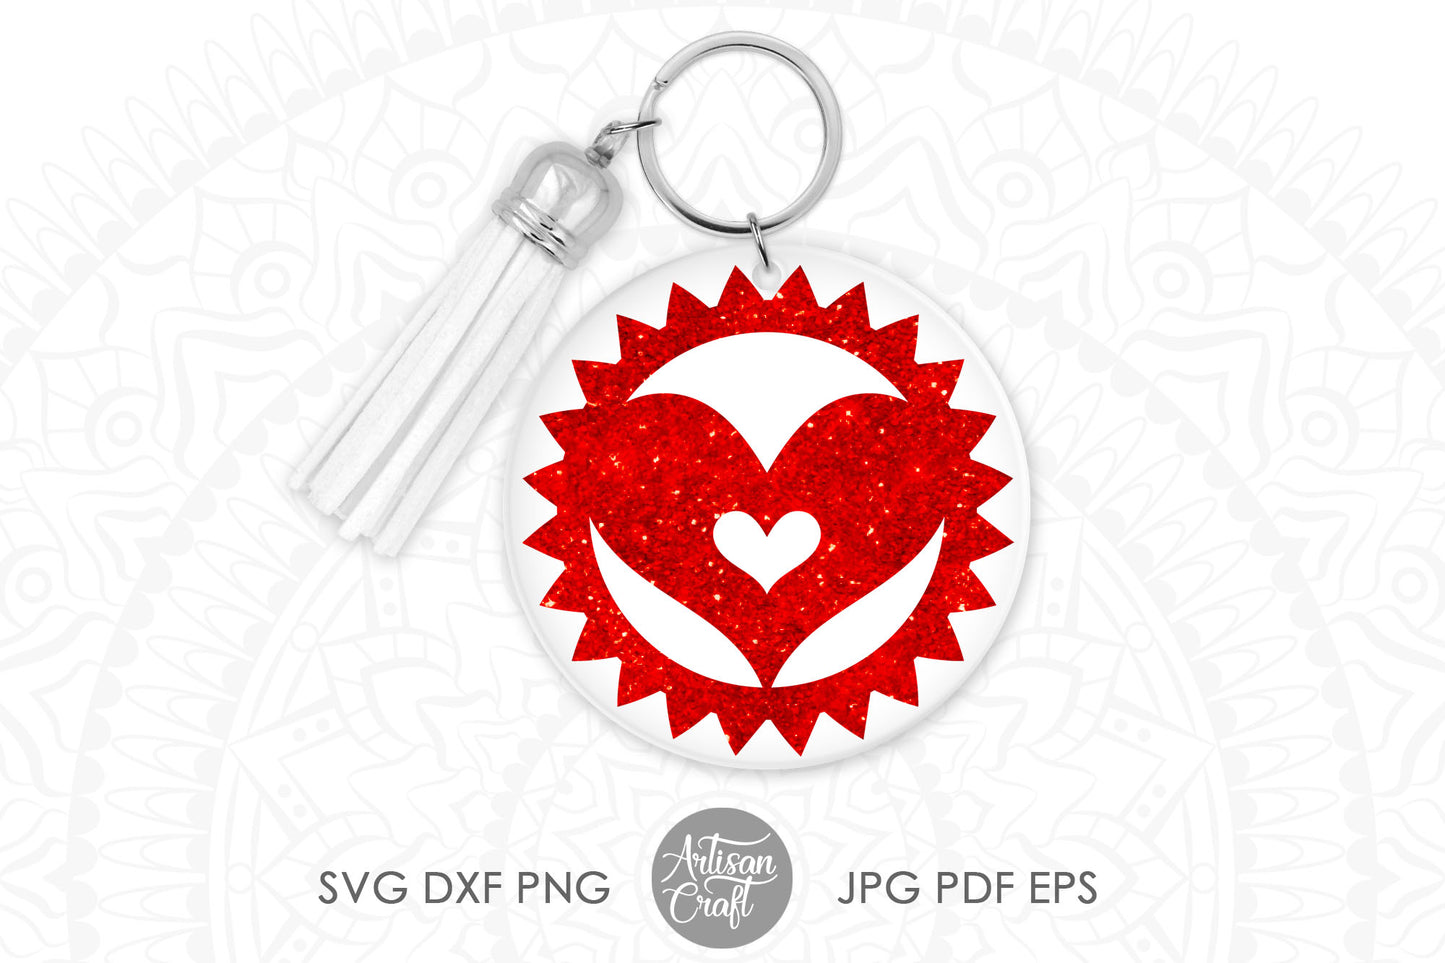 Heart keychain SVG PNG